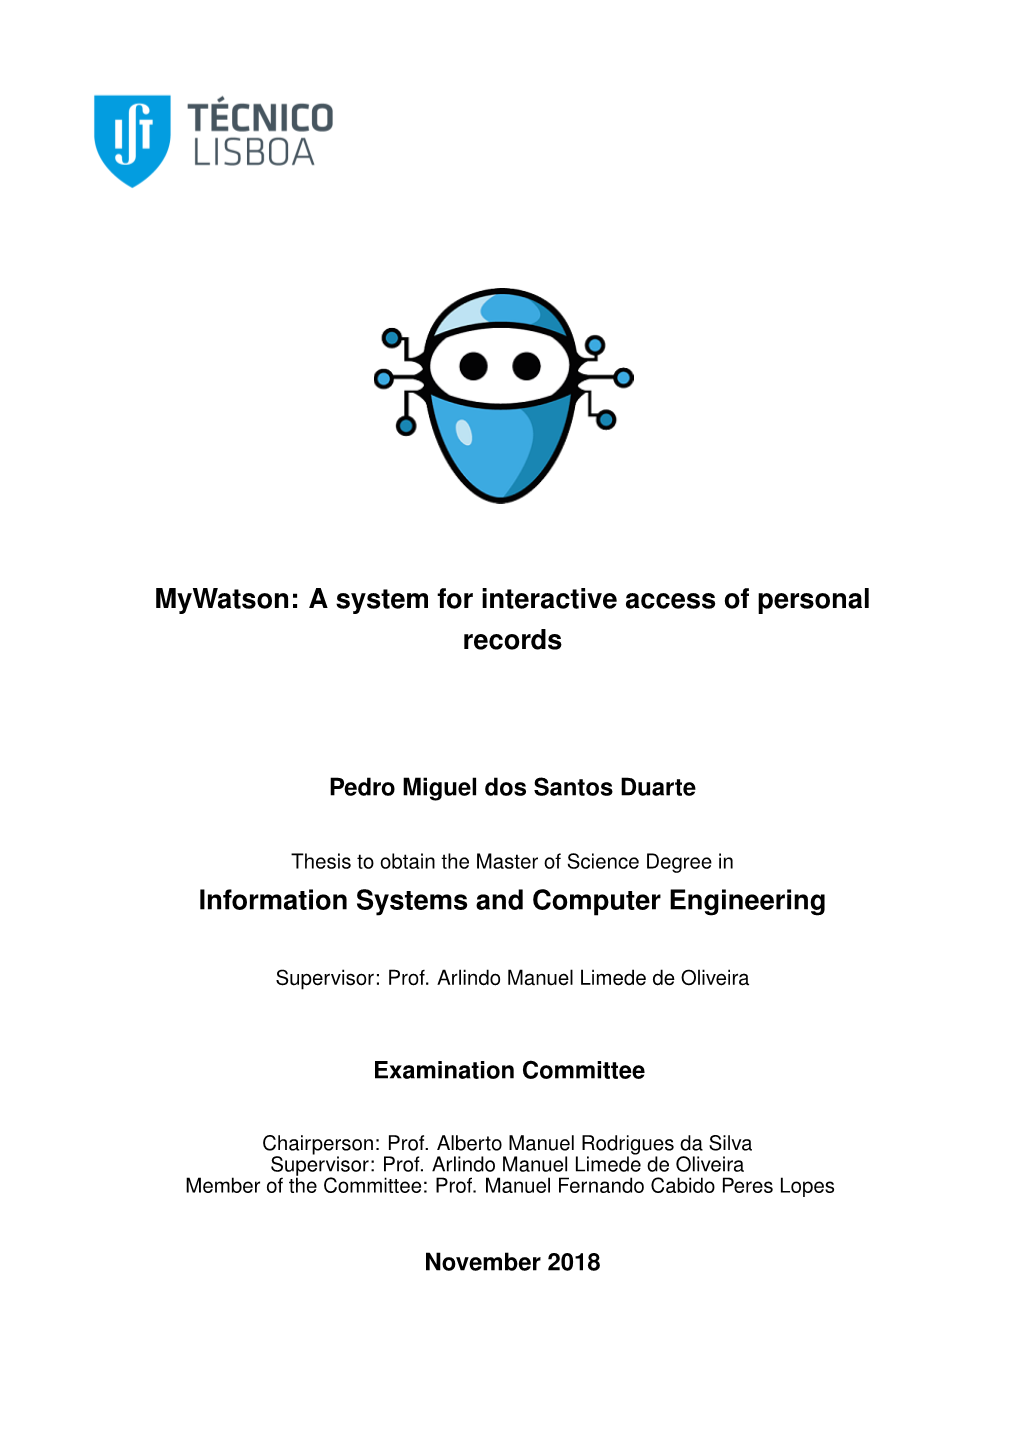 Mywatson: a System for Interactive Access of Personal Records